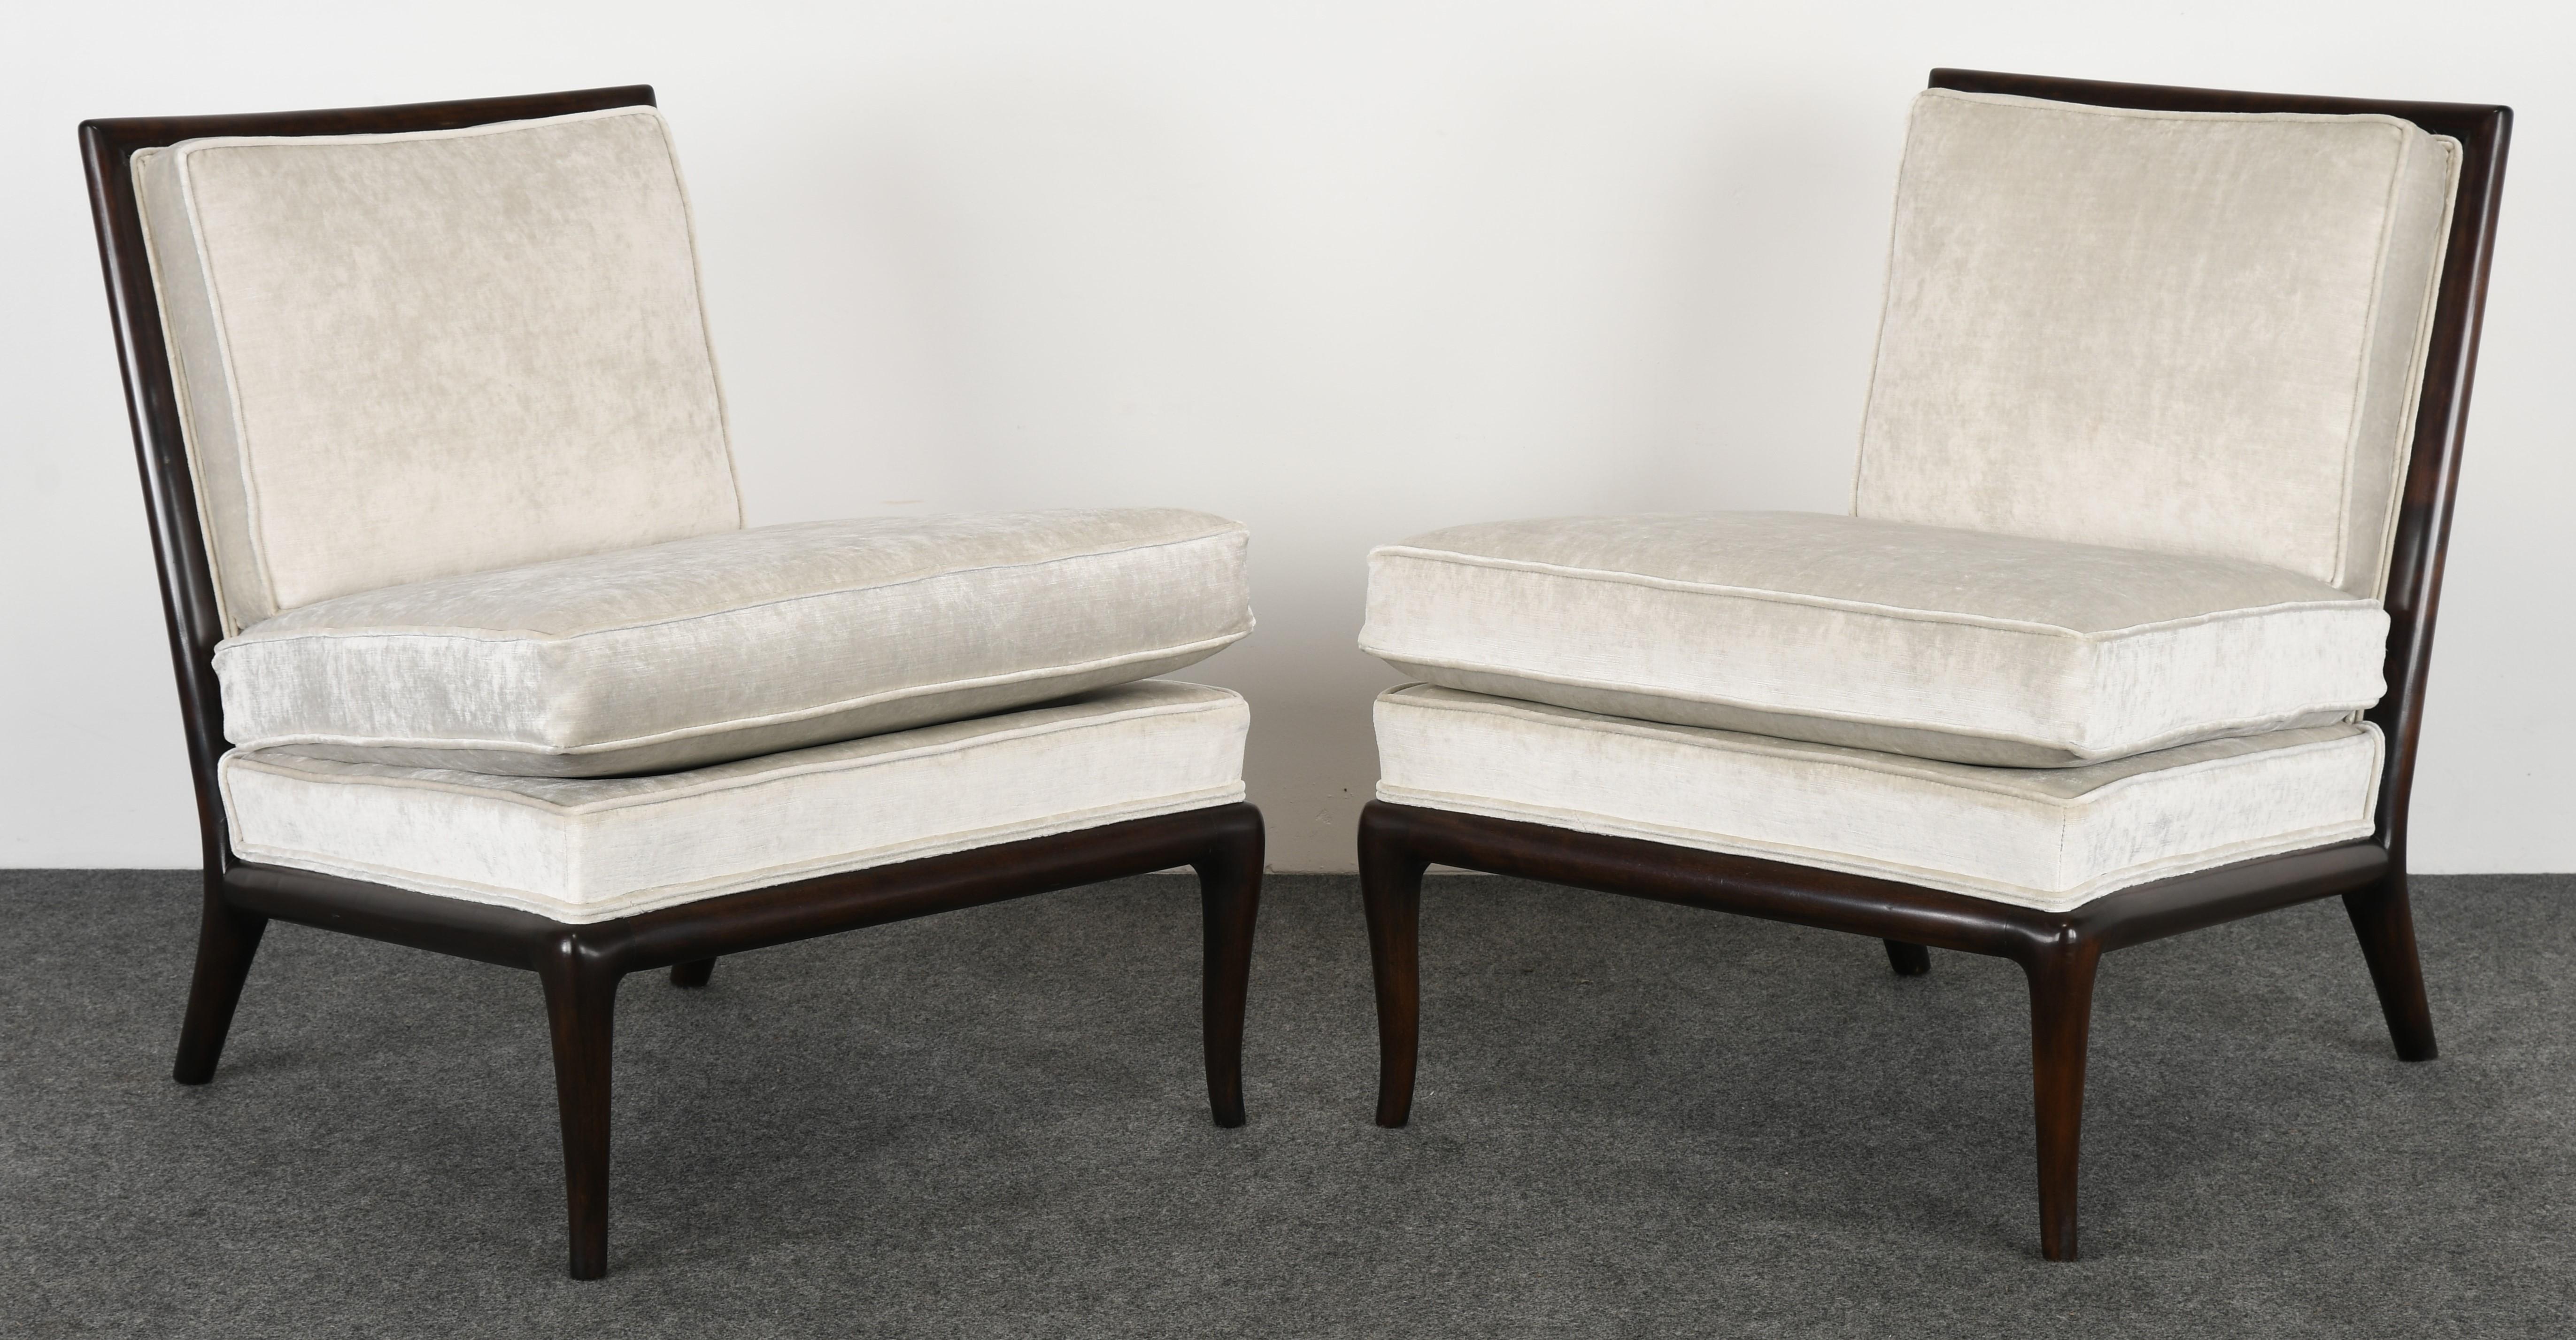 A luxurious pair of T.H. Robsjohn Gibbings slipper chairs for Widdicomb Furniture Company. The chairs are structurally sound and newly refinished wood, new upholstery is recommended. Special pricing on the pair...fabric new but not perfect.